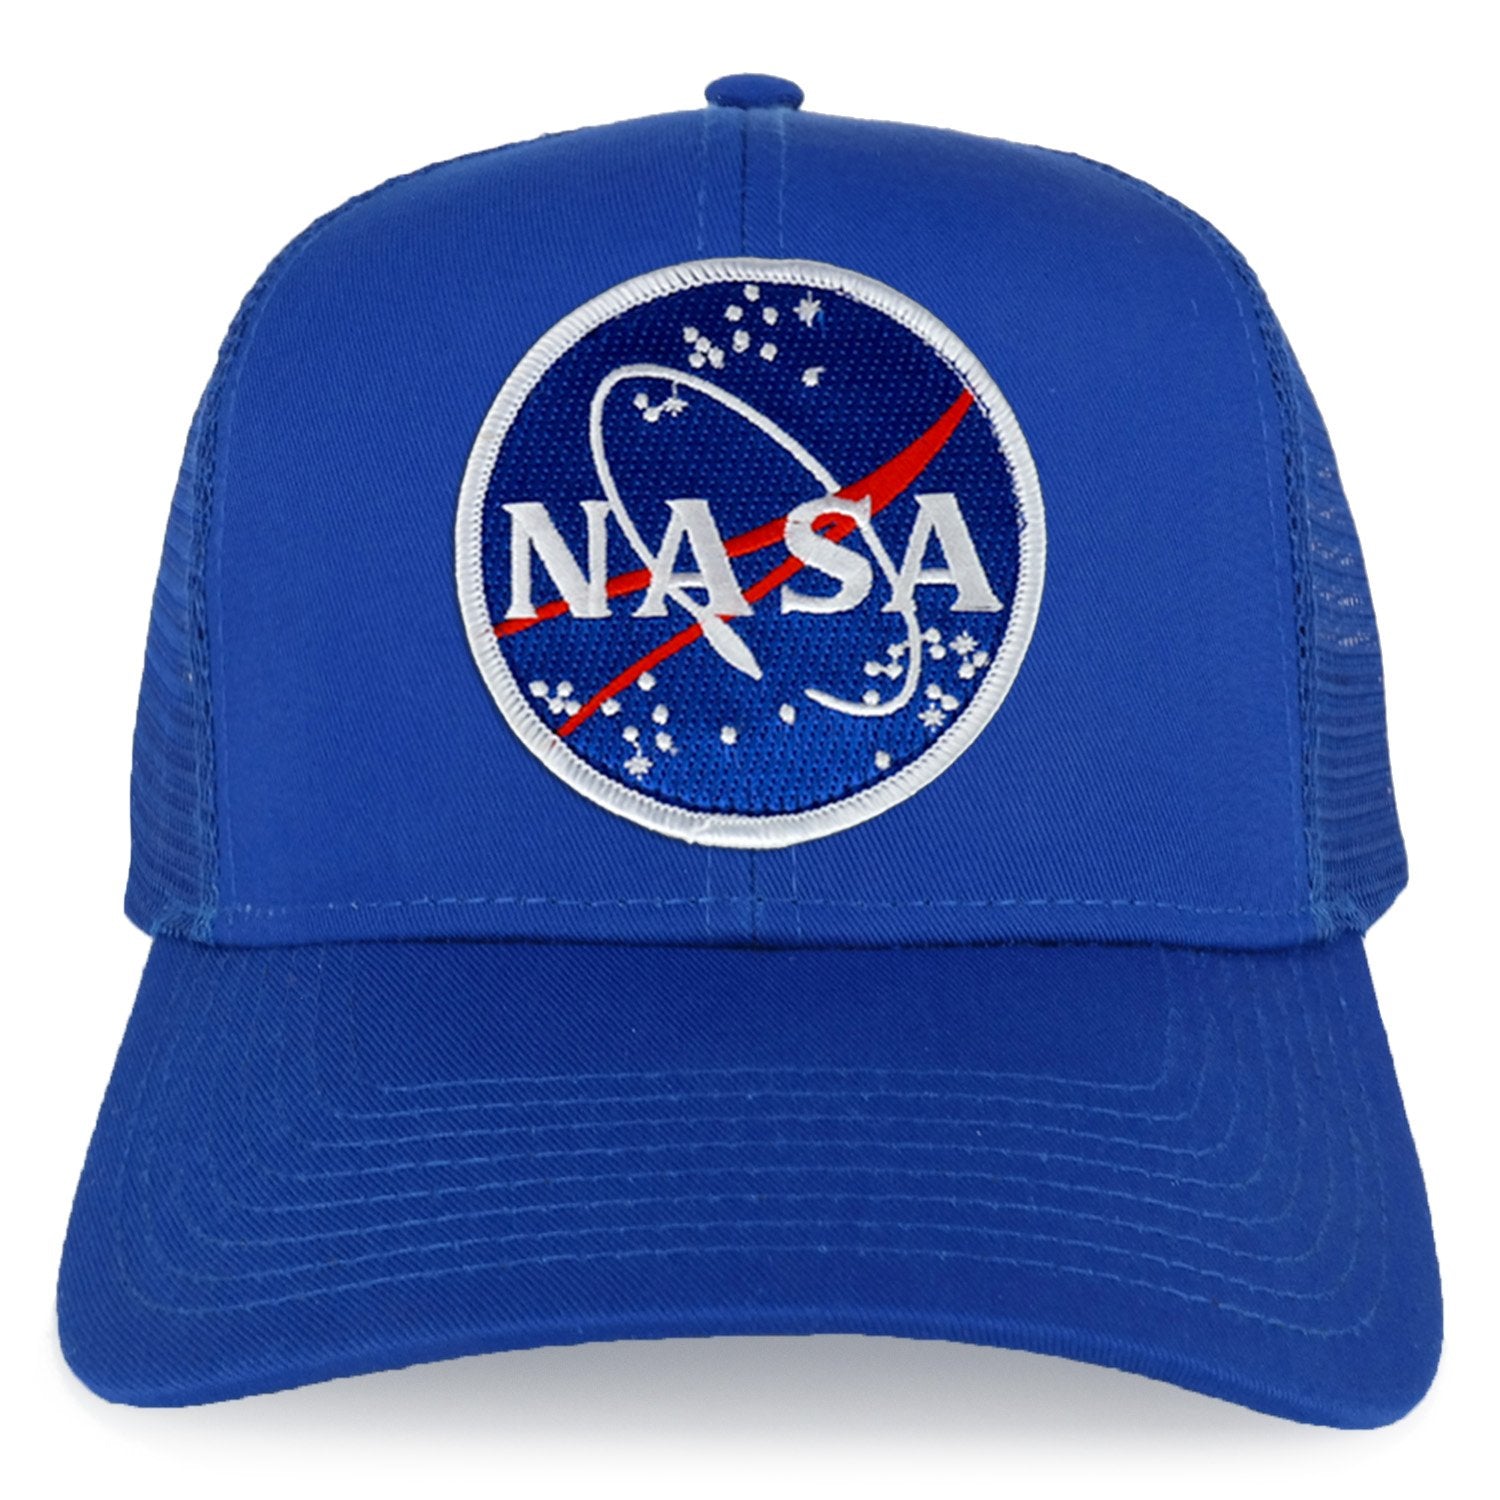 Nasa Cotton Fabric Patches on Blue